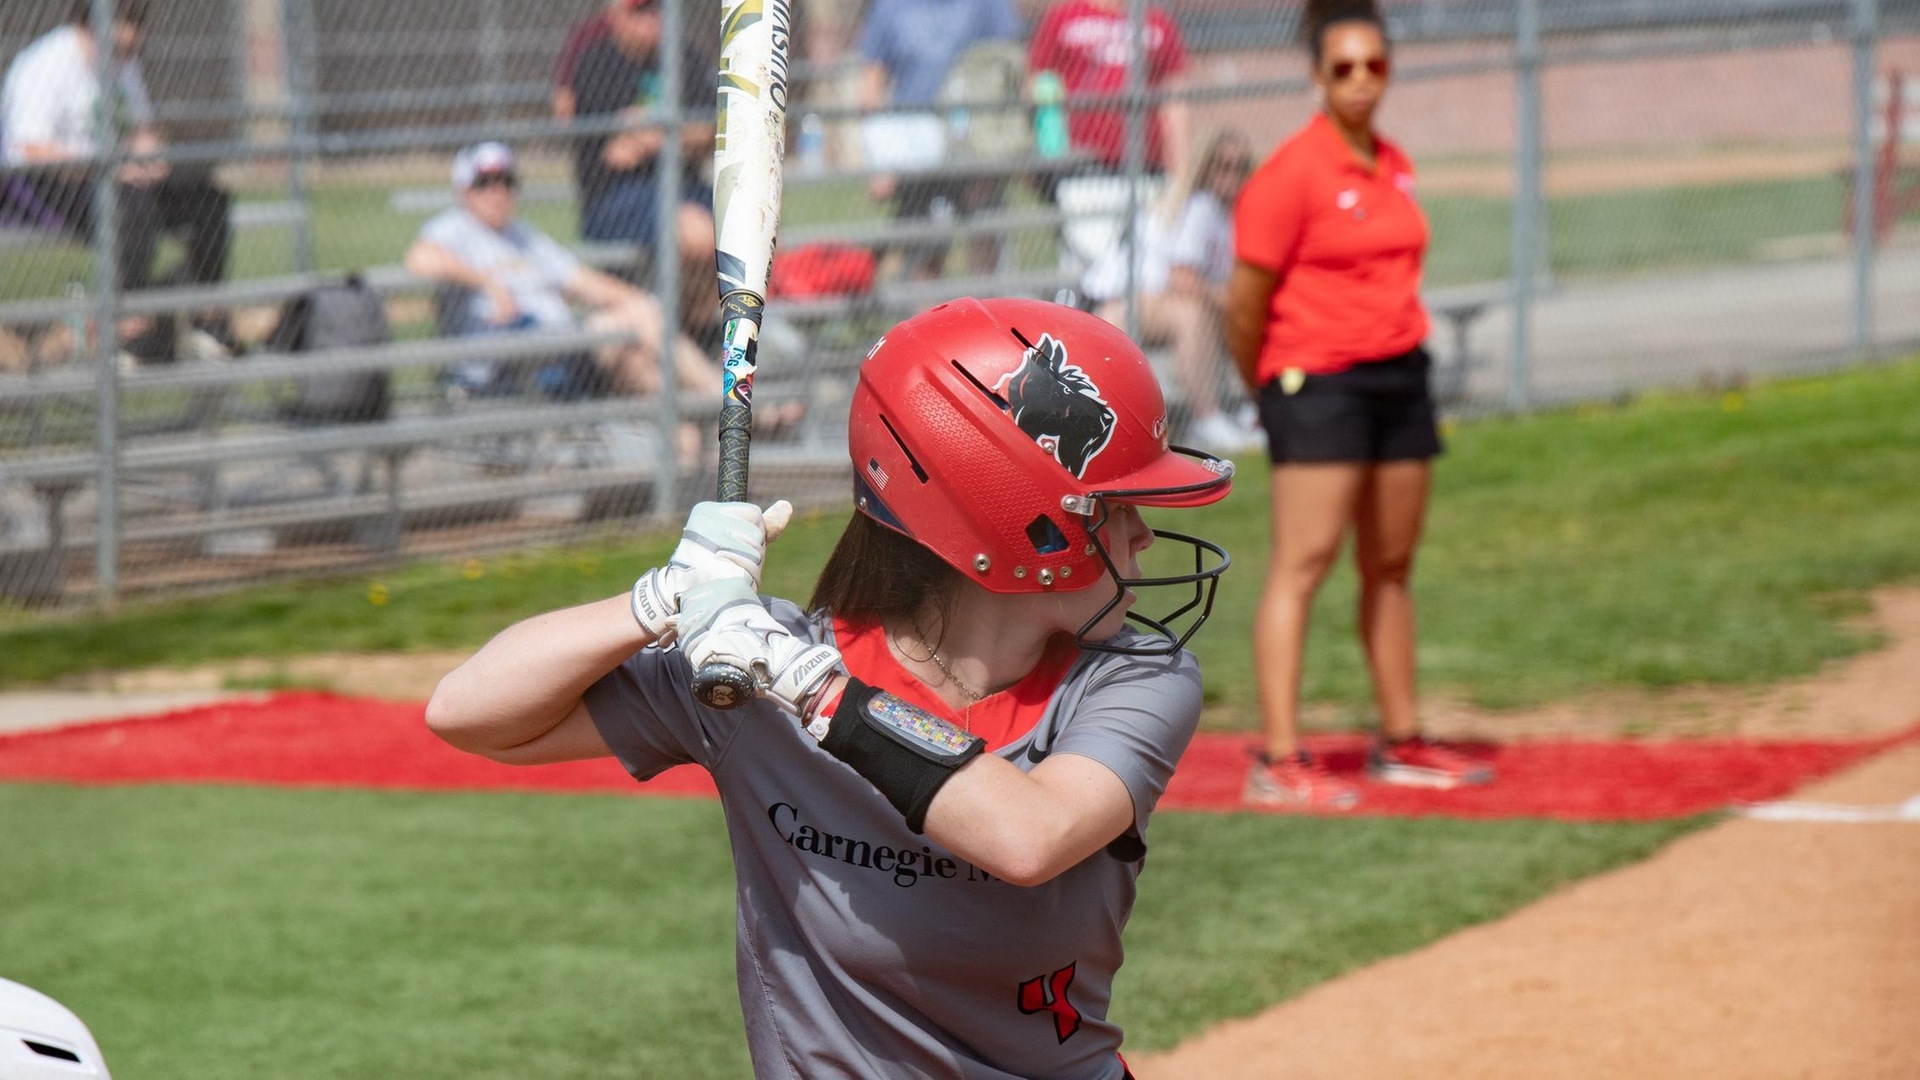 softball batter wearing a gray uniform jersey and red helmet at the plate ready for the pitch